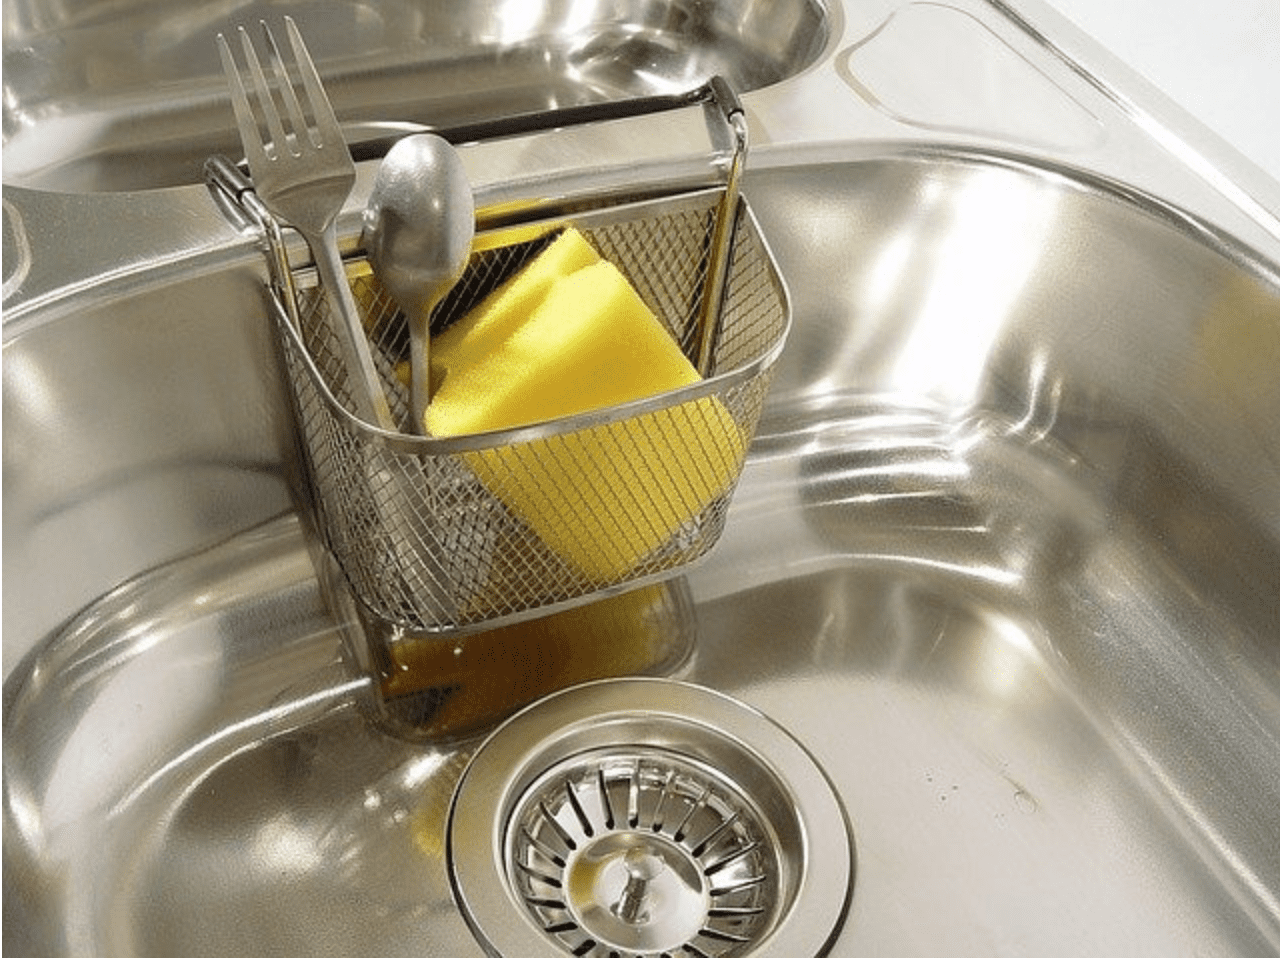 Why Does My Kitchen Sink Smell Like Rotten Eggs? - Kitchen sink